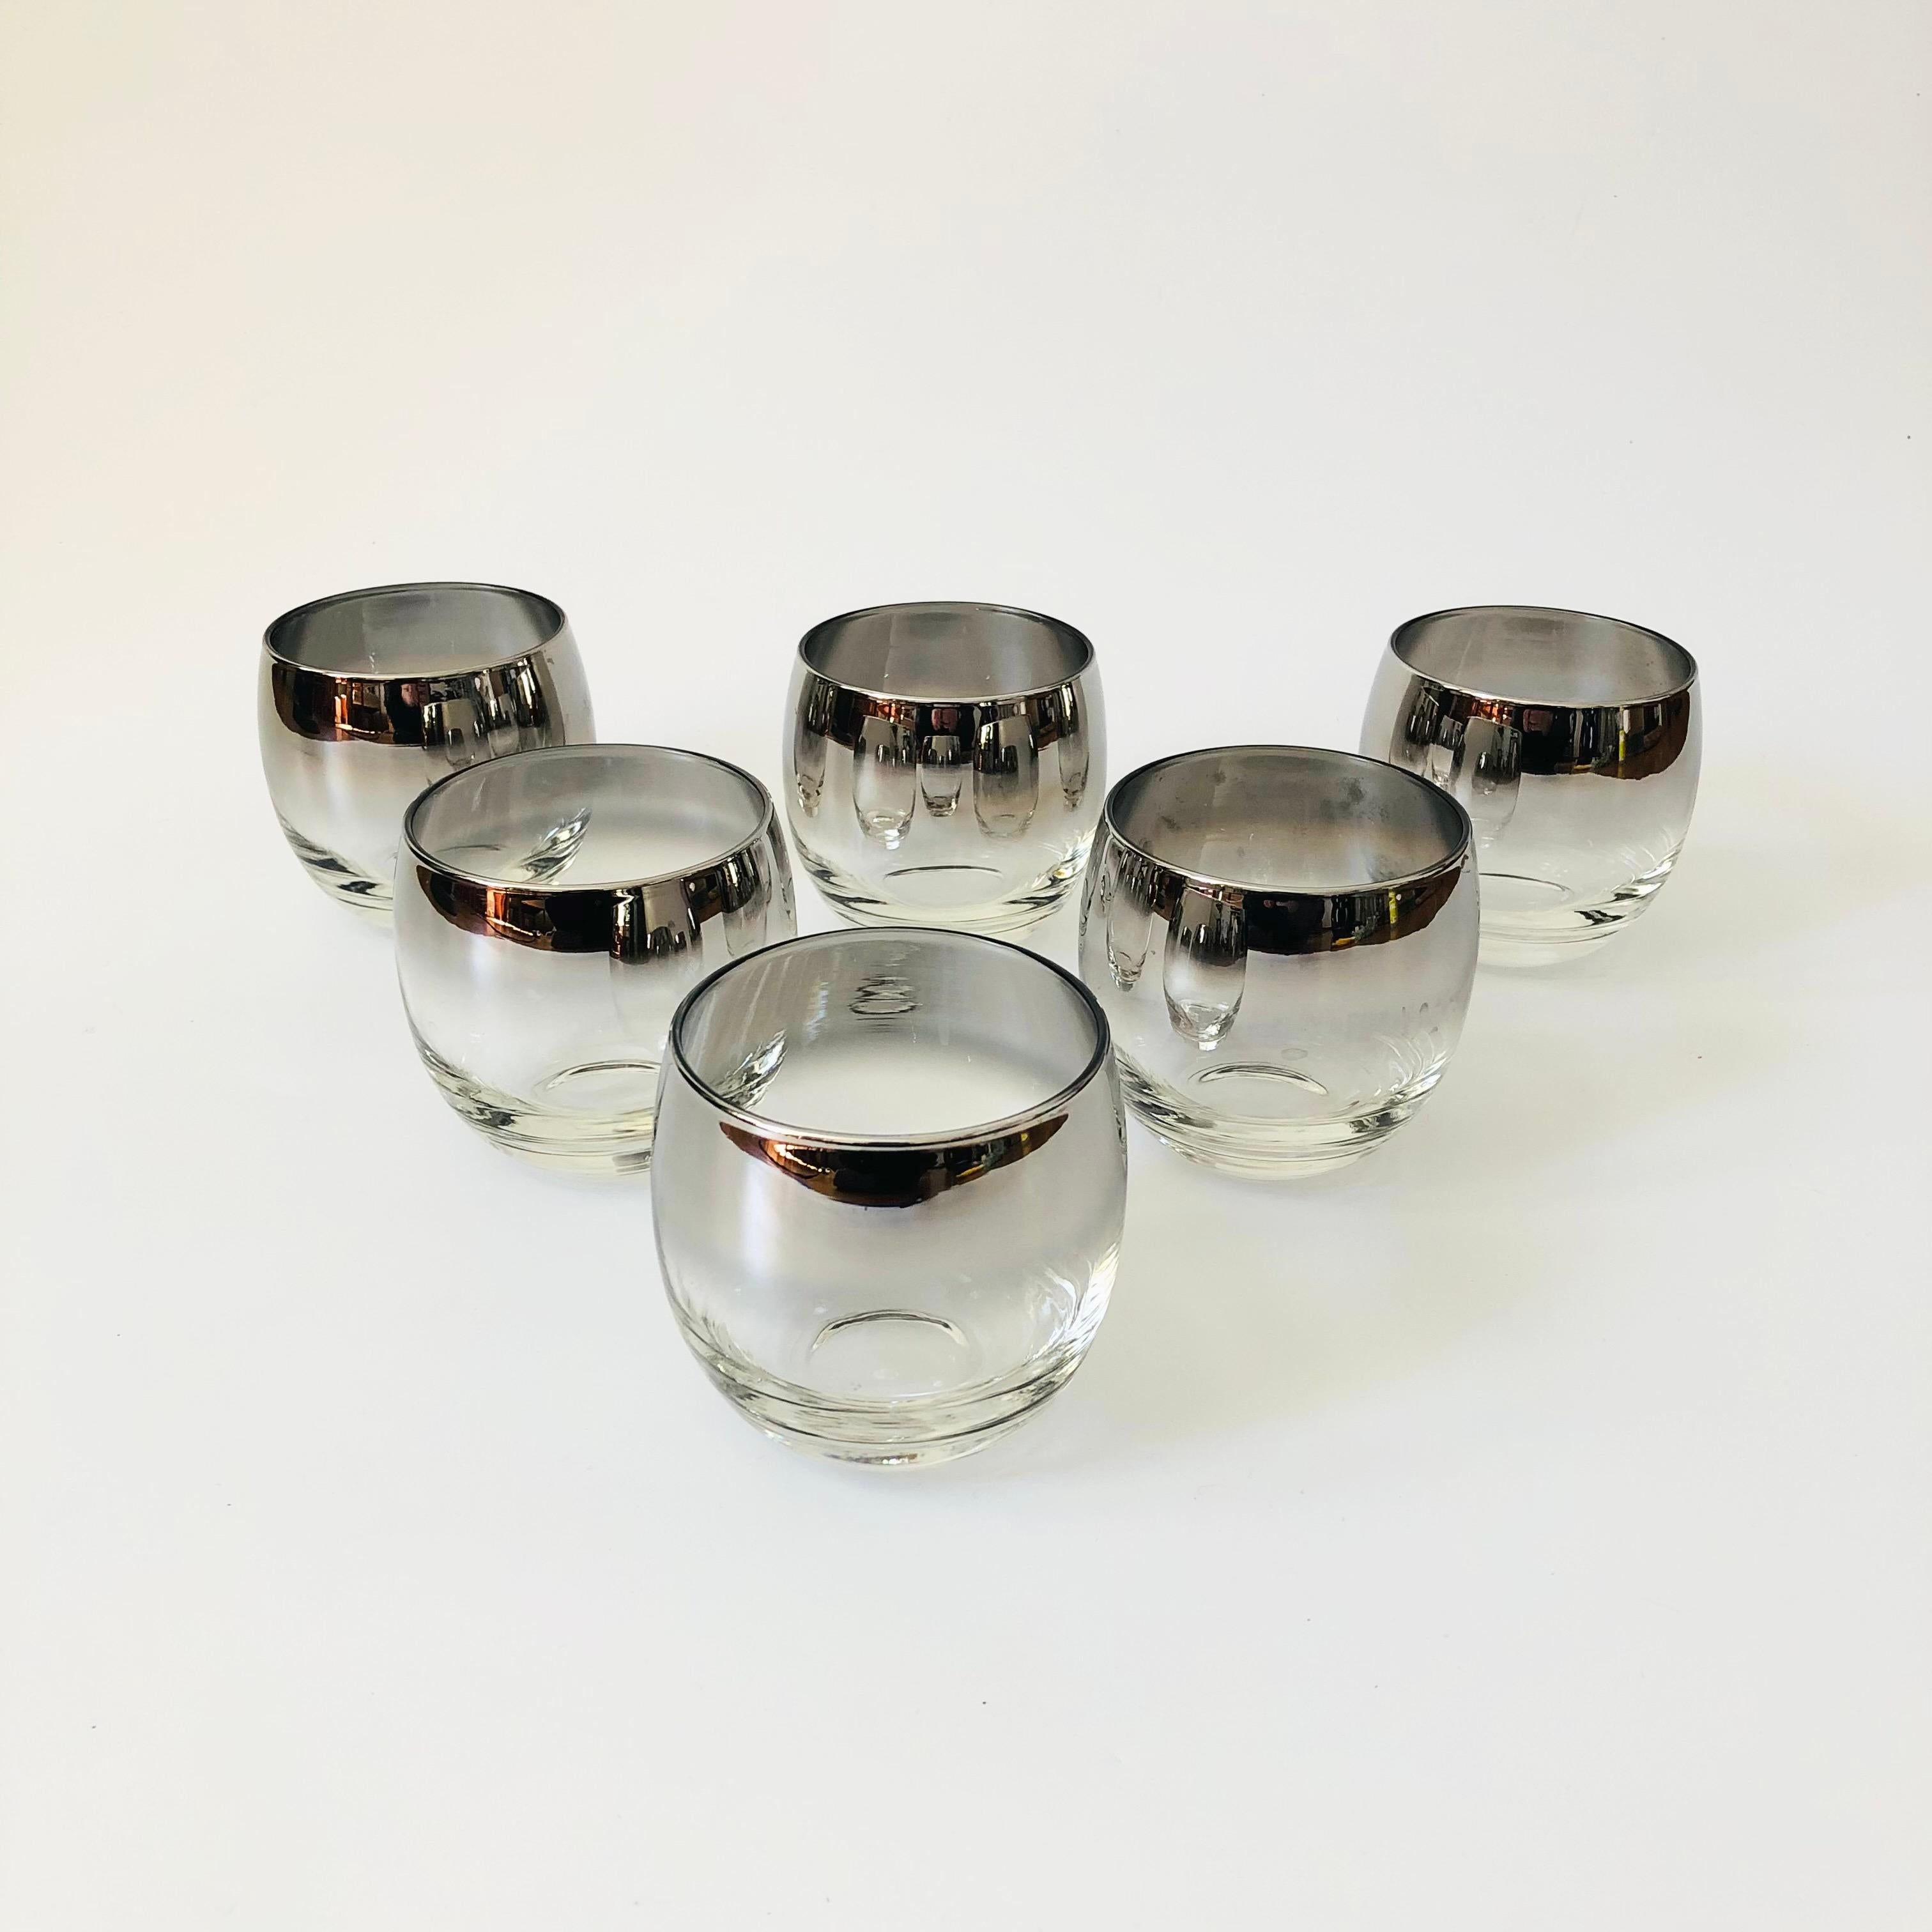 A beautiful set of 6  mid century silver fade roly poly cocktail glasses. Each glass decorated with metallic silver that fades to clear at the bases. Made  in the Dorothy Thorpe style. Perfect for using for cocktails.

